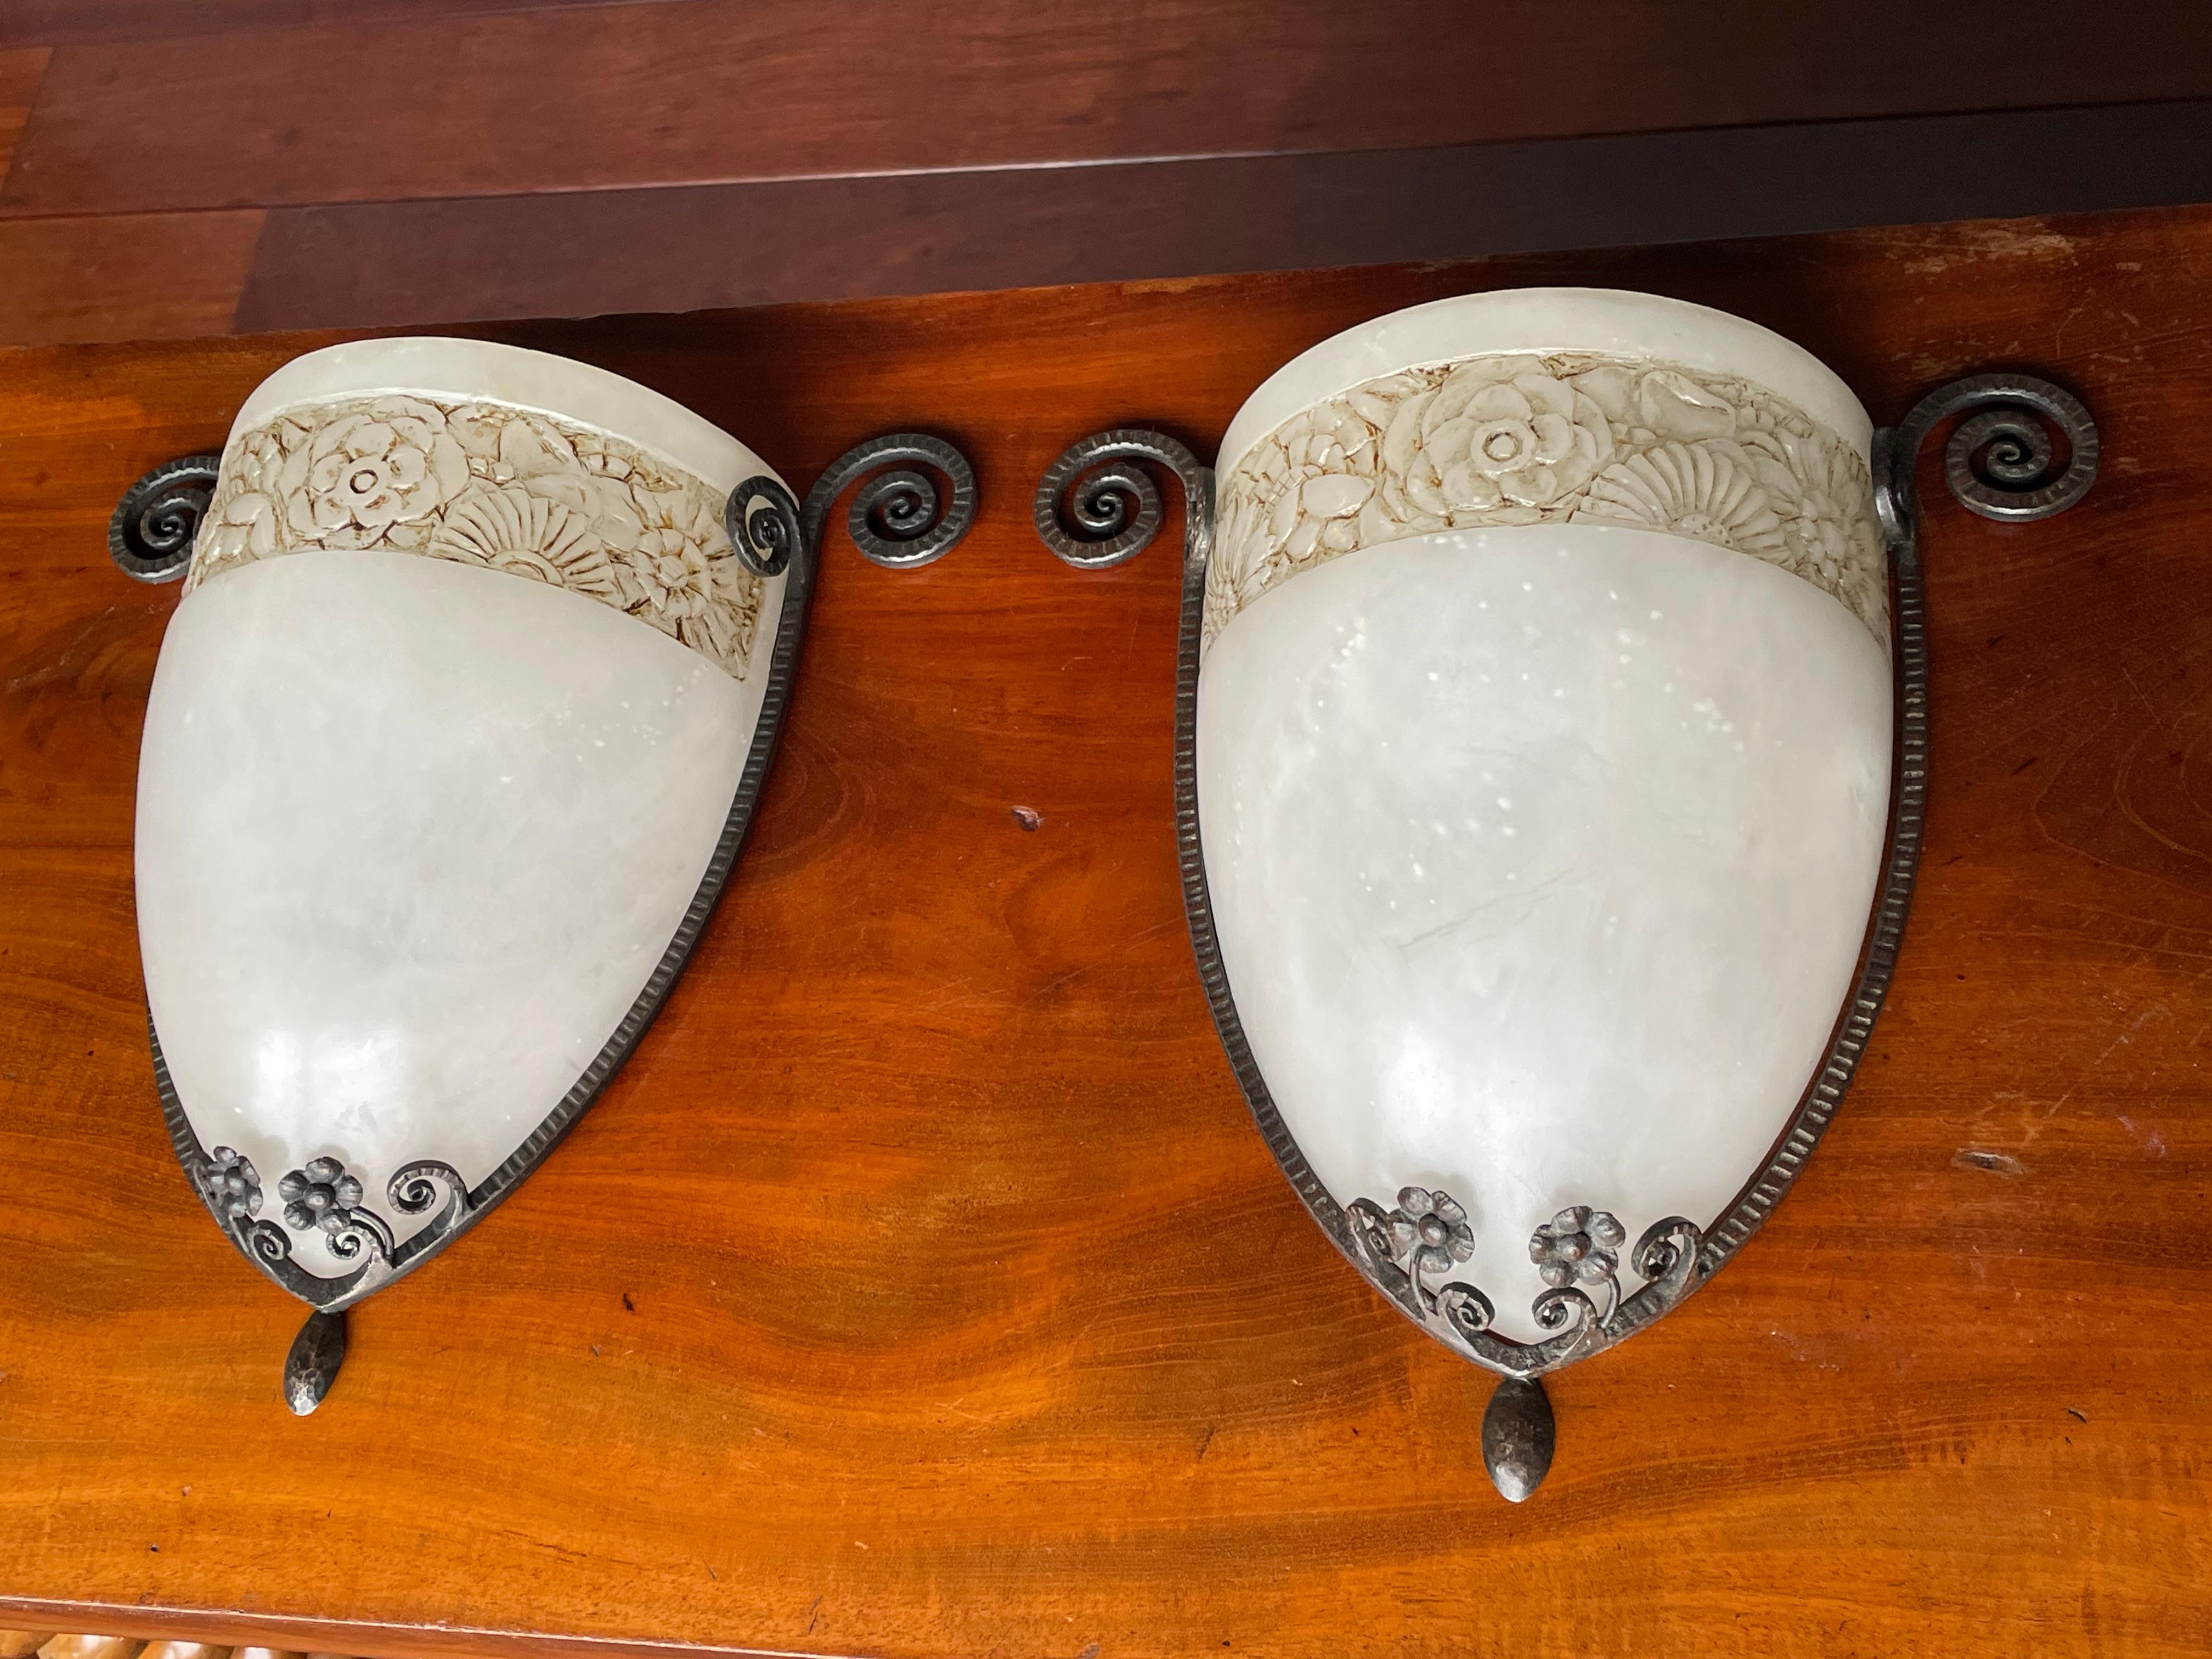 Rare Pair of Elegant Art Deco Wall Sconces Hand Forged Wrought Iron & Alabaster For Sale 4